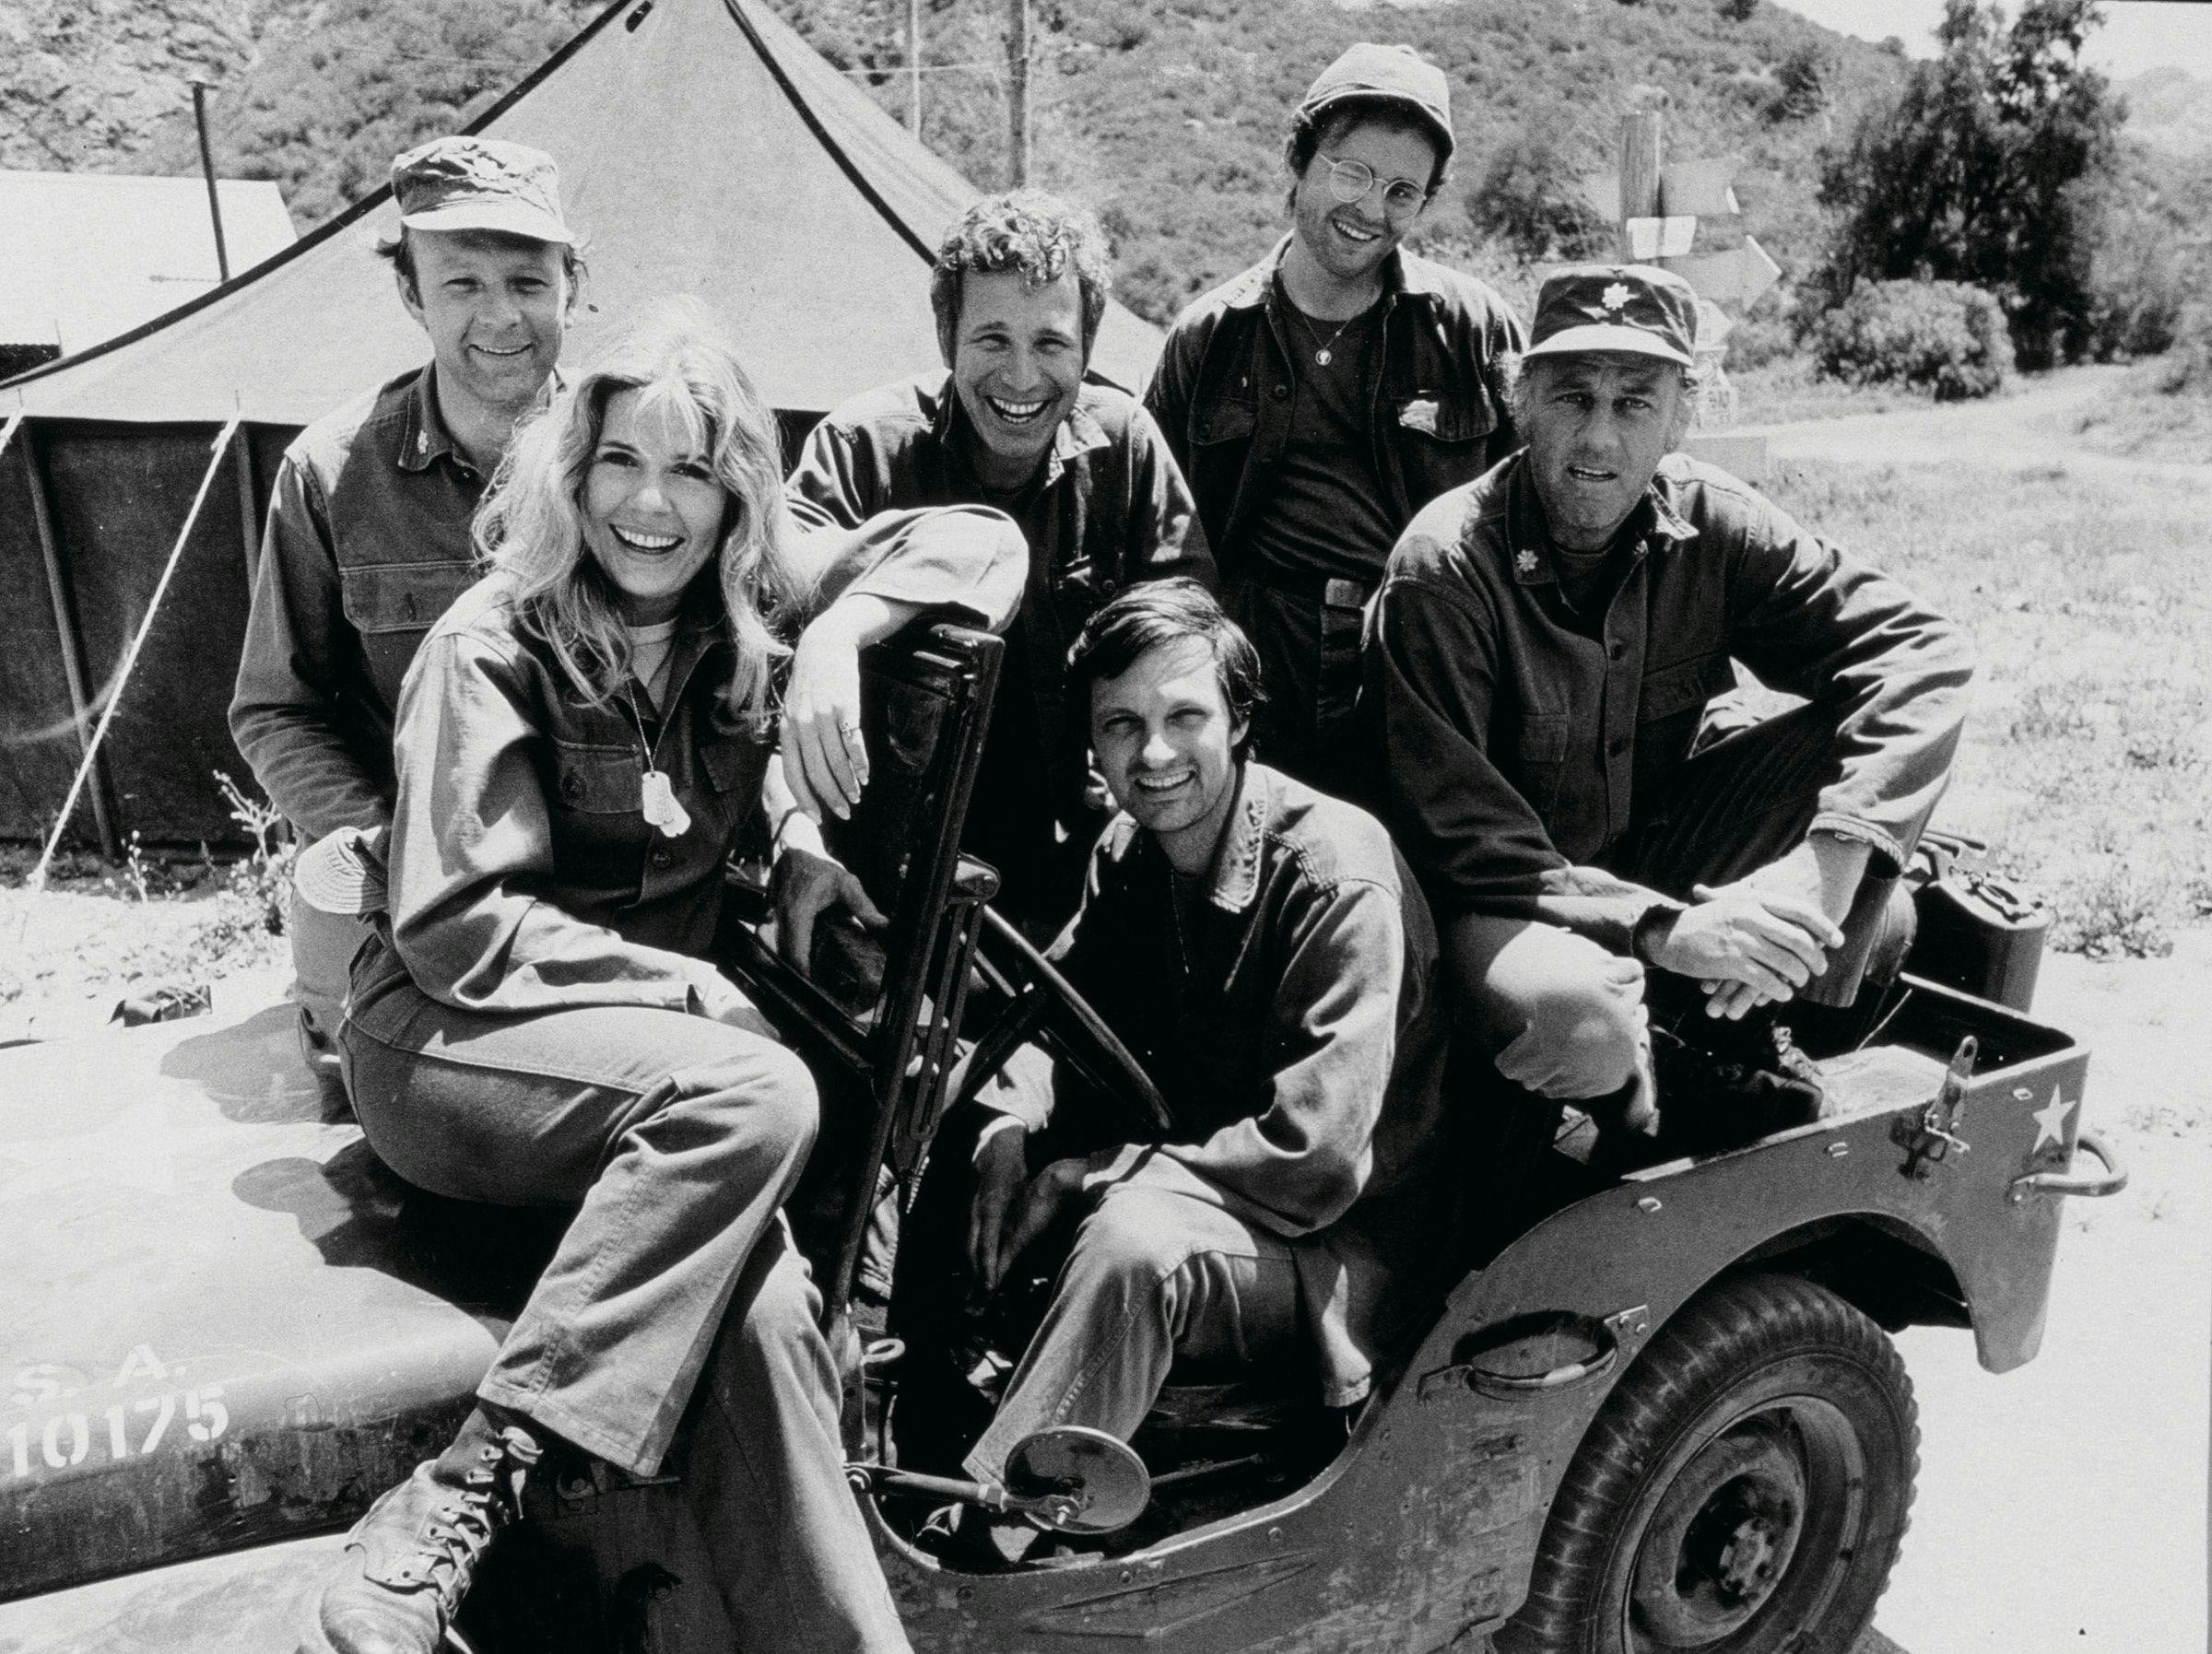 The cast of “M*A*S*H” in 1972. Credit: 20TH CENTURY FOX TV / Album / Alamy Stock Photo (M*A*S*H)